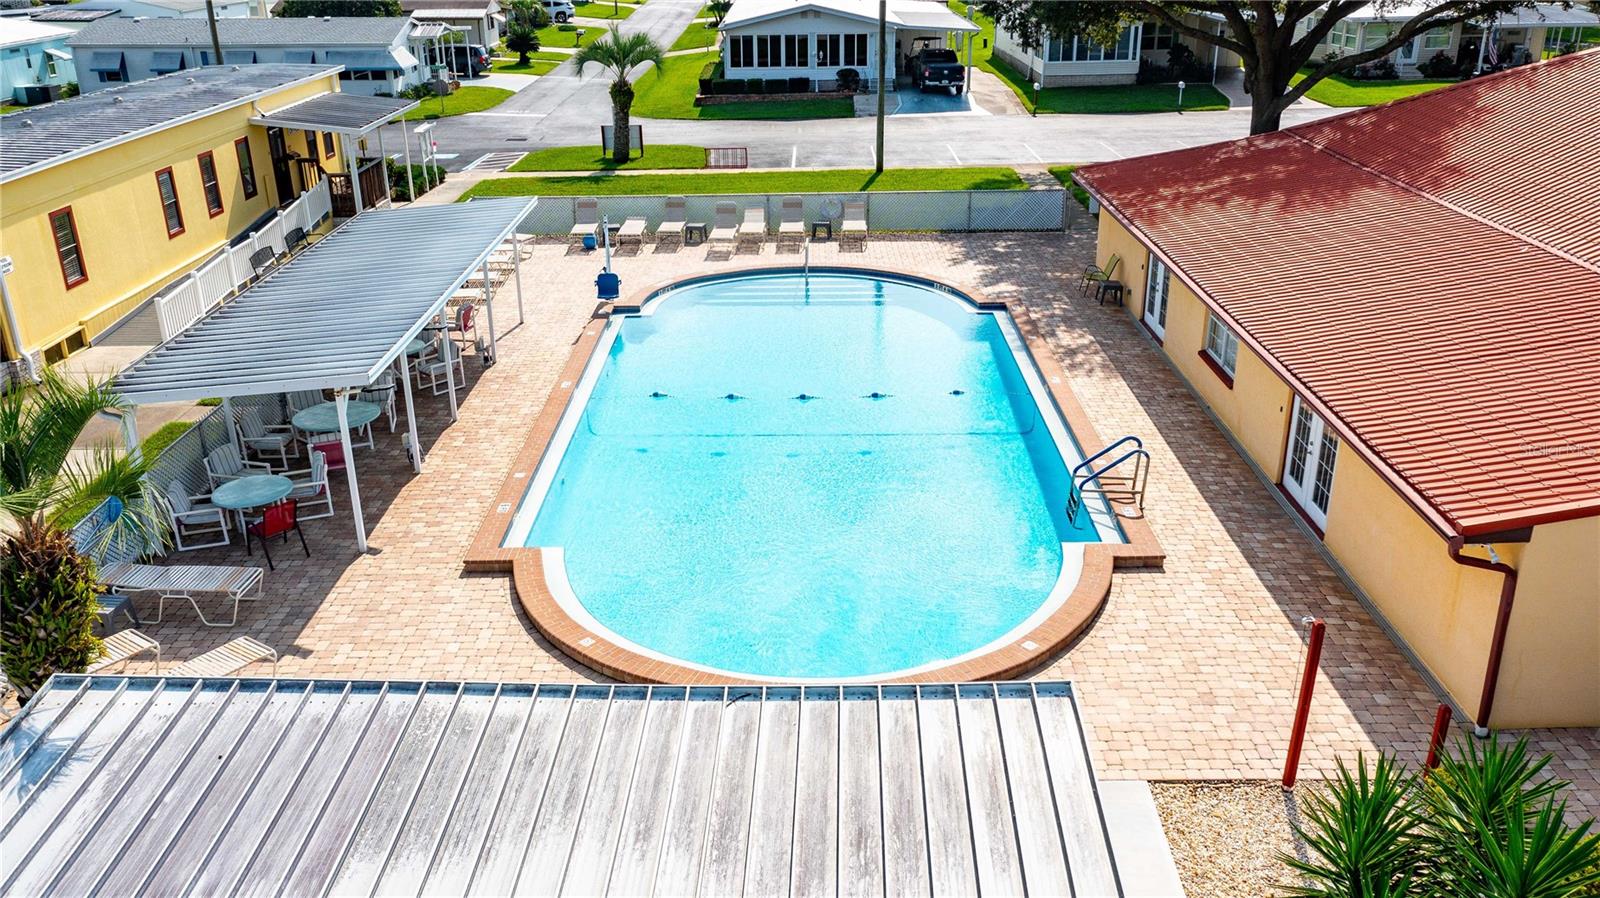 Outdoor heated pool in this community.